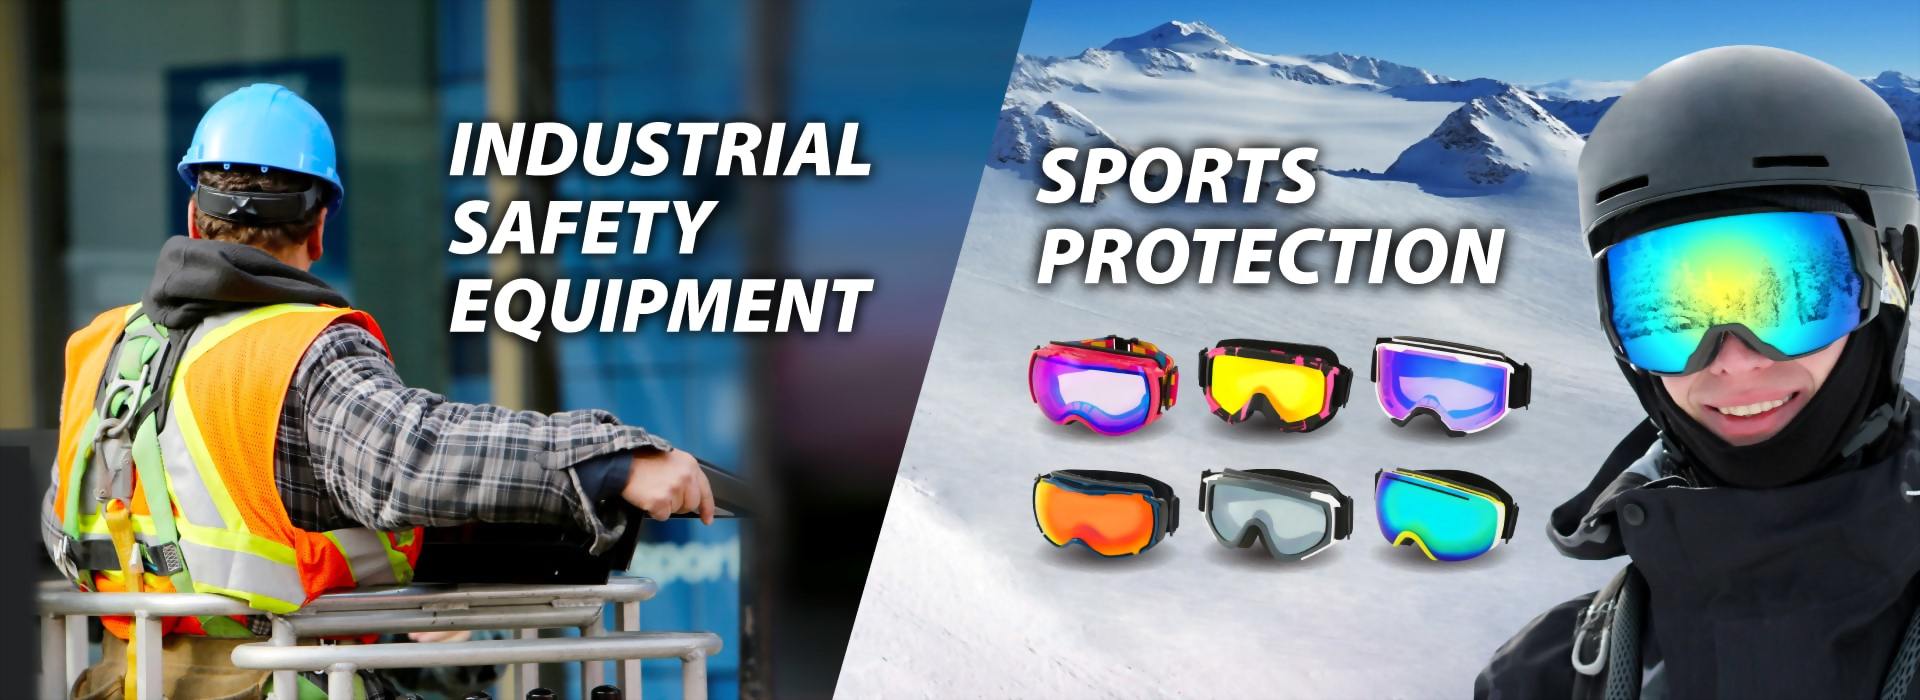 Industrial Safety Equipment / Sports Protection